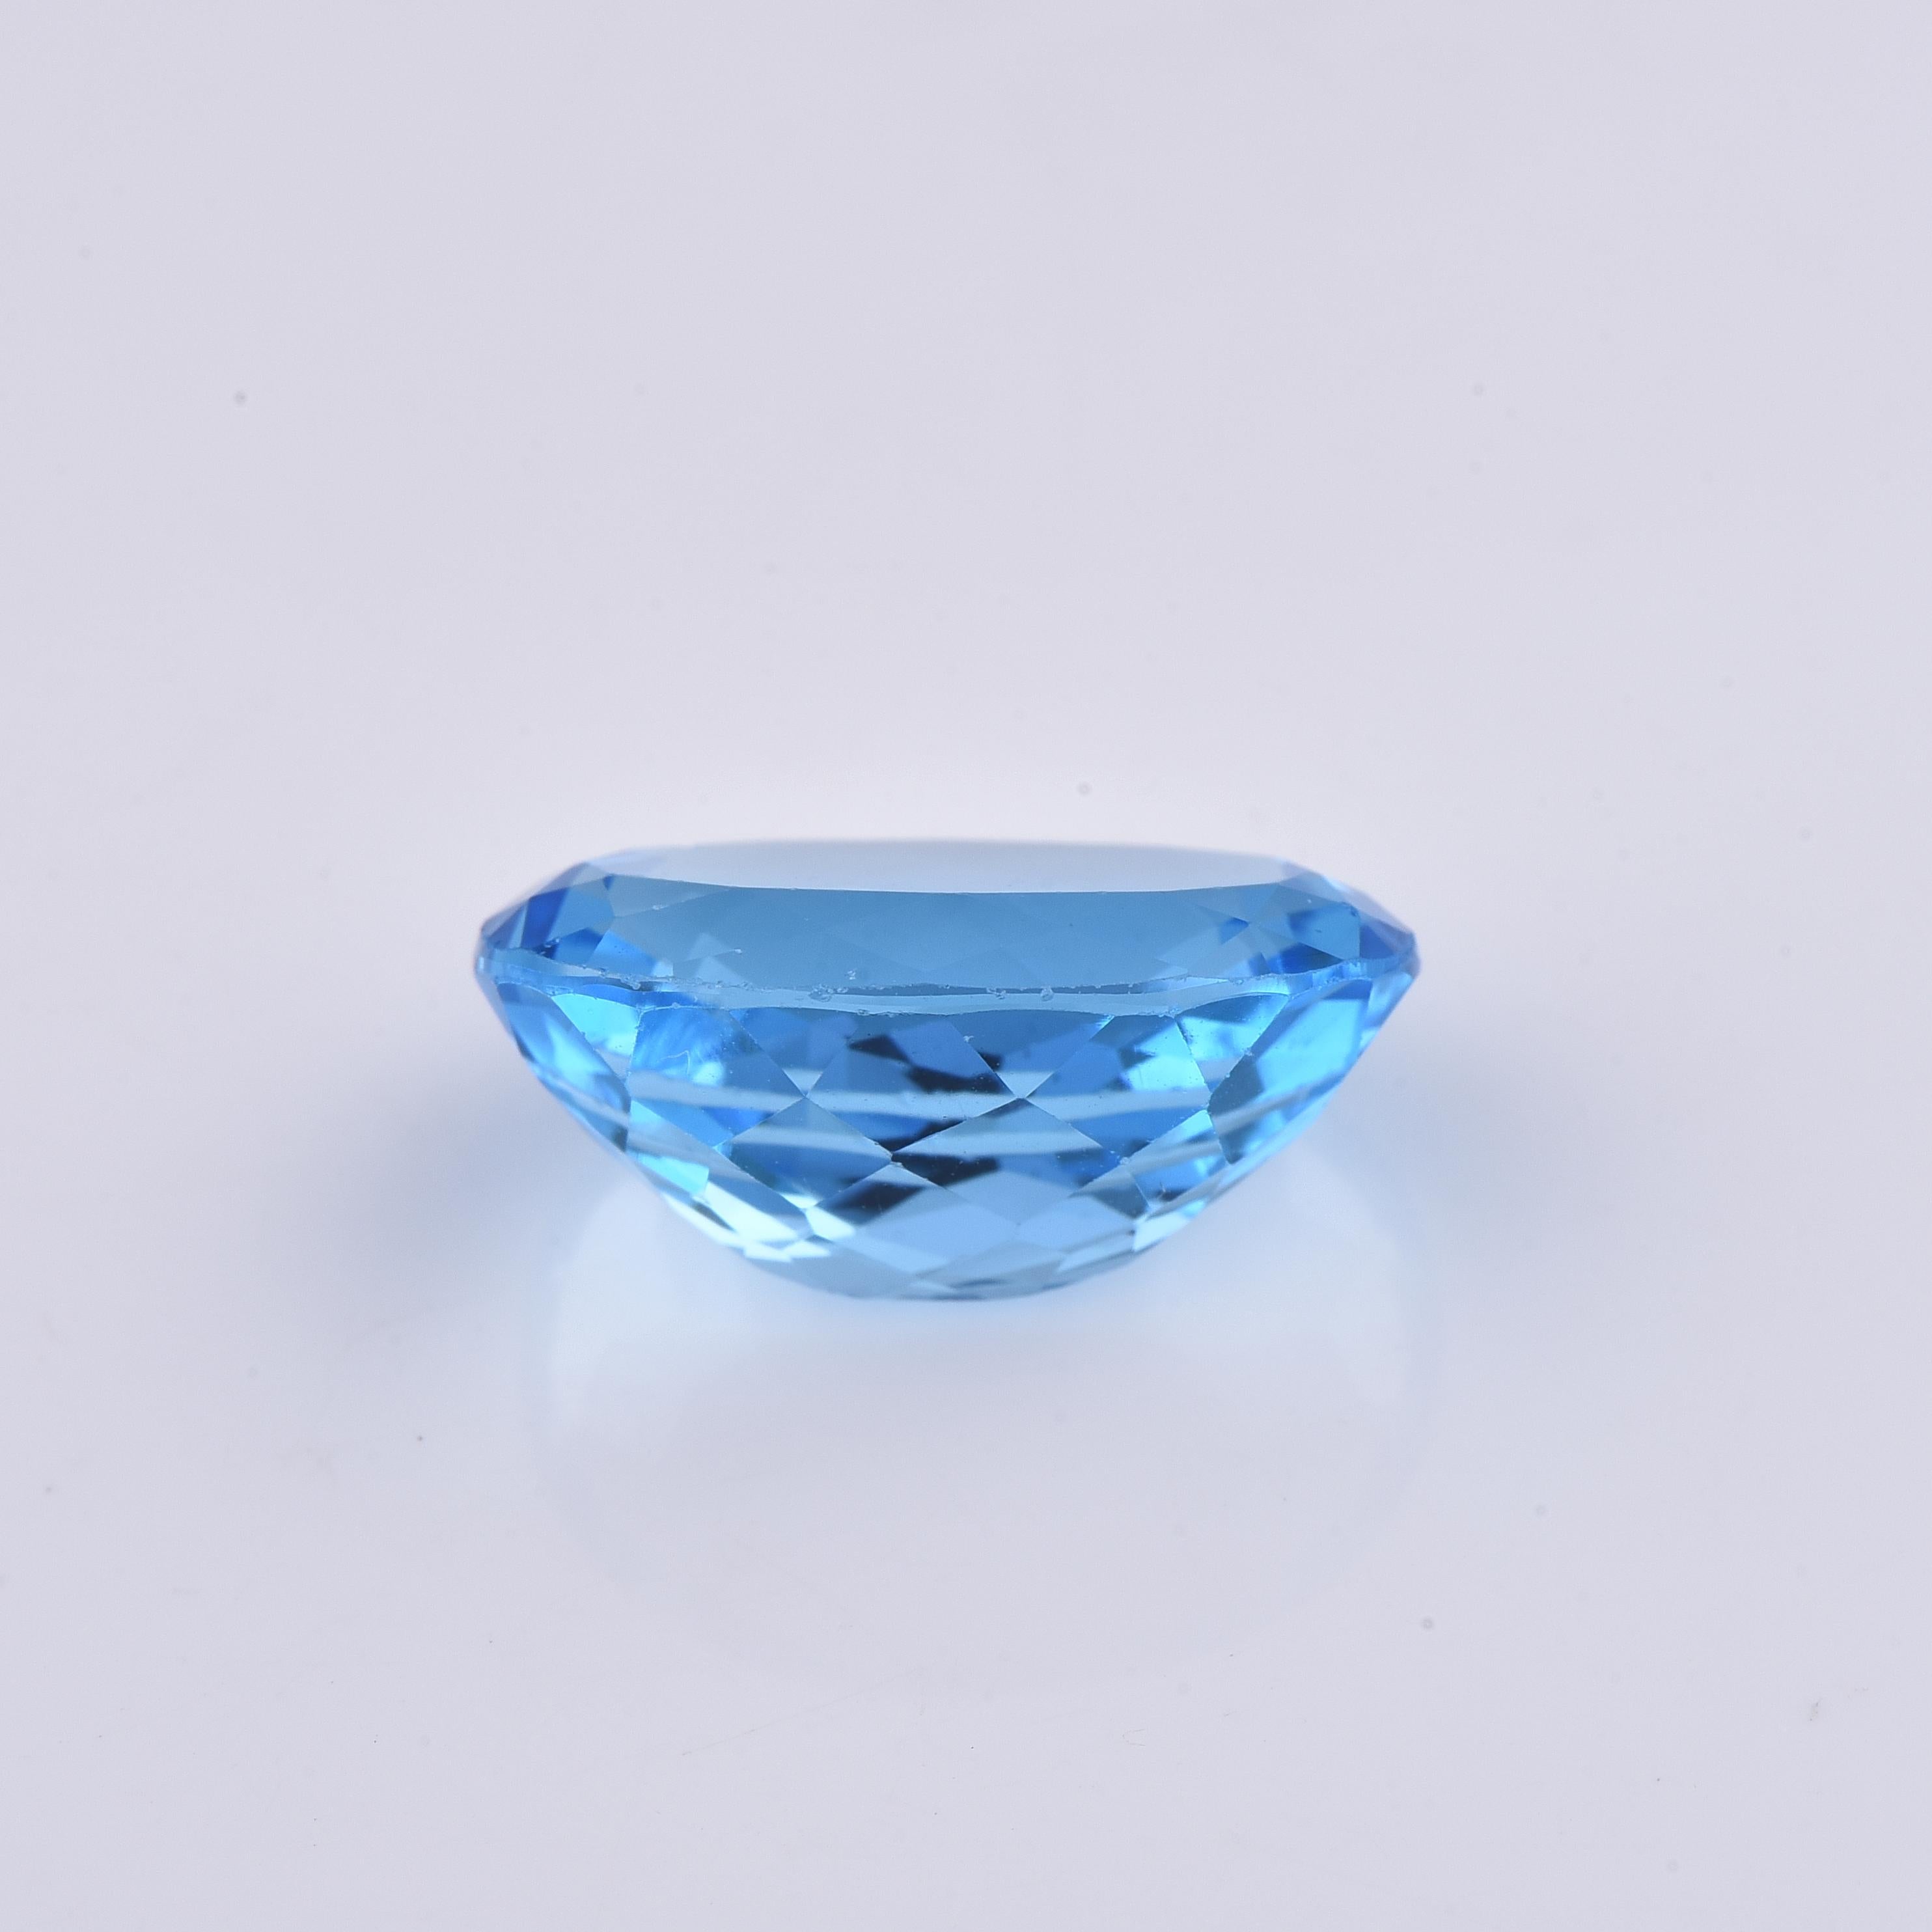 Stone Information: Natural Swiss Blue Topaz
Shape/Cut: Oval Shape
Color: Blue
Dimensions (mm): 16.00 x 12.00 x 8.83
Weight: 13.71ct